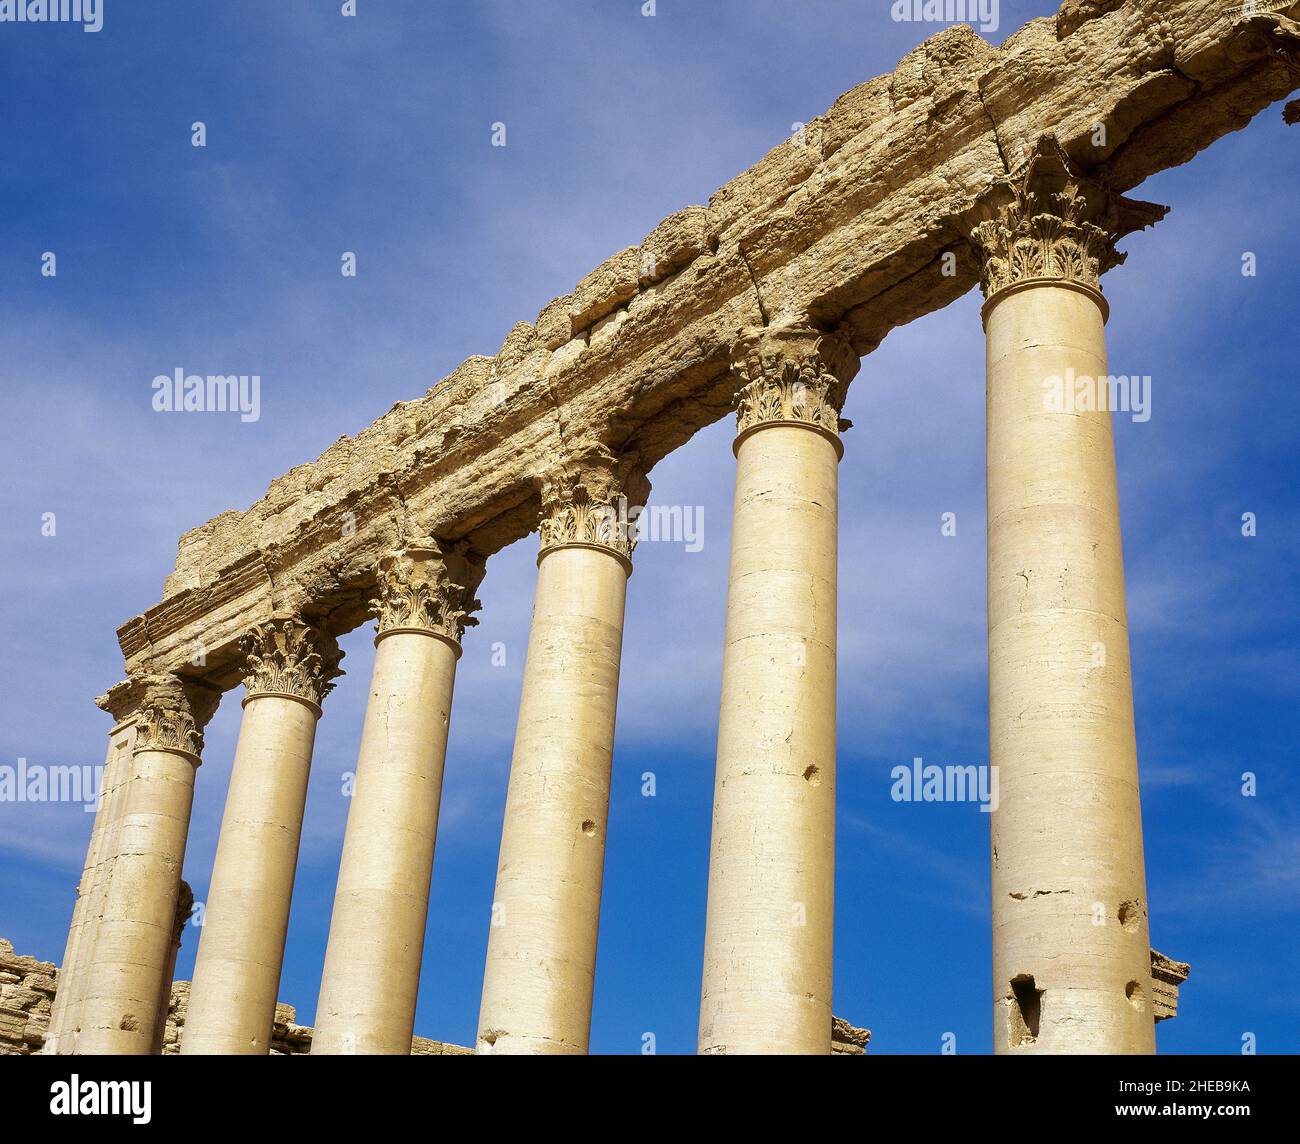 Syria, Palmyra. Temple of Bel. Built under Tiberius in 19 AD. Architectura detail of the columns in the inner court of the temple (Corinthian order). Photo taken before Syrian civil war. Destroyed by the Islamic State of Iraq and Syria in August 2015. Stock Photo